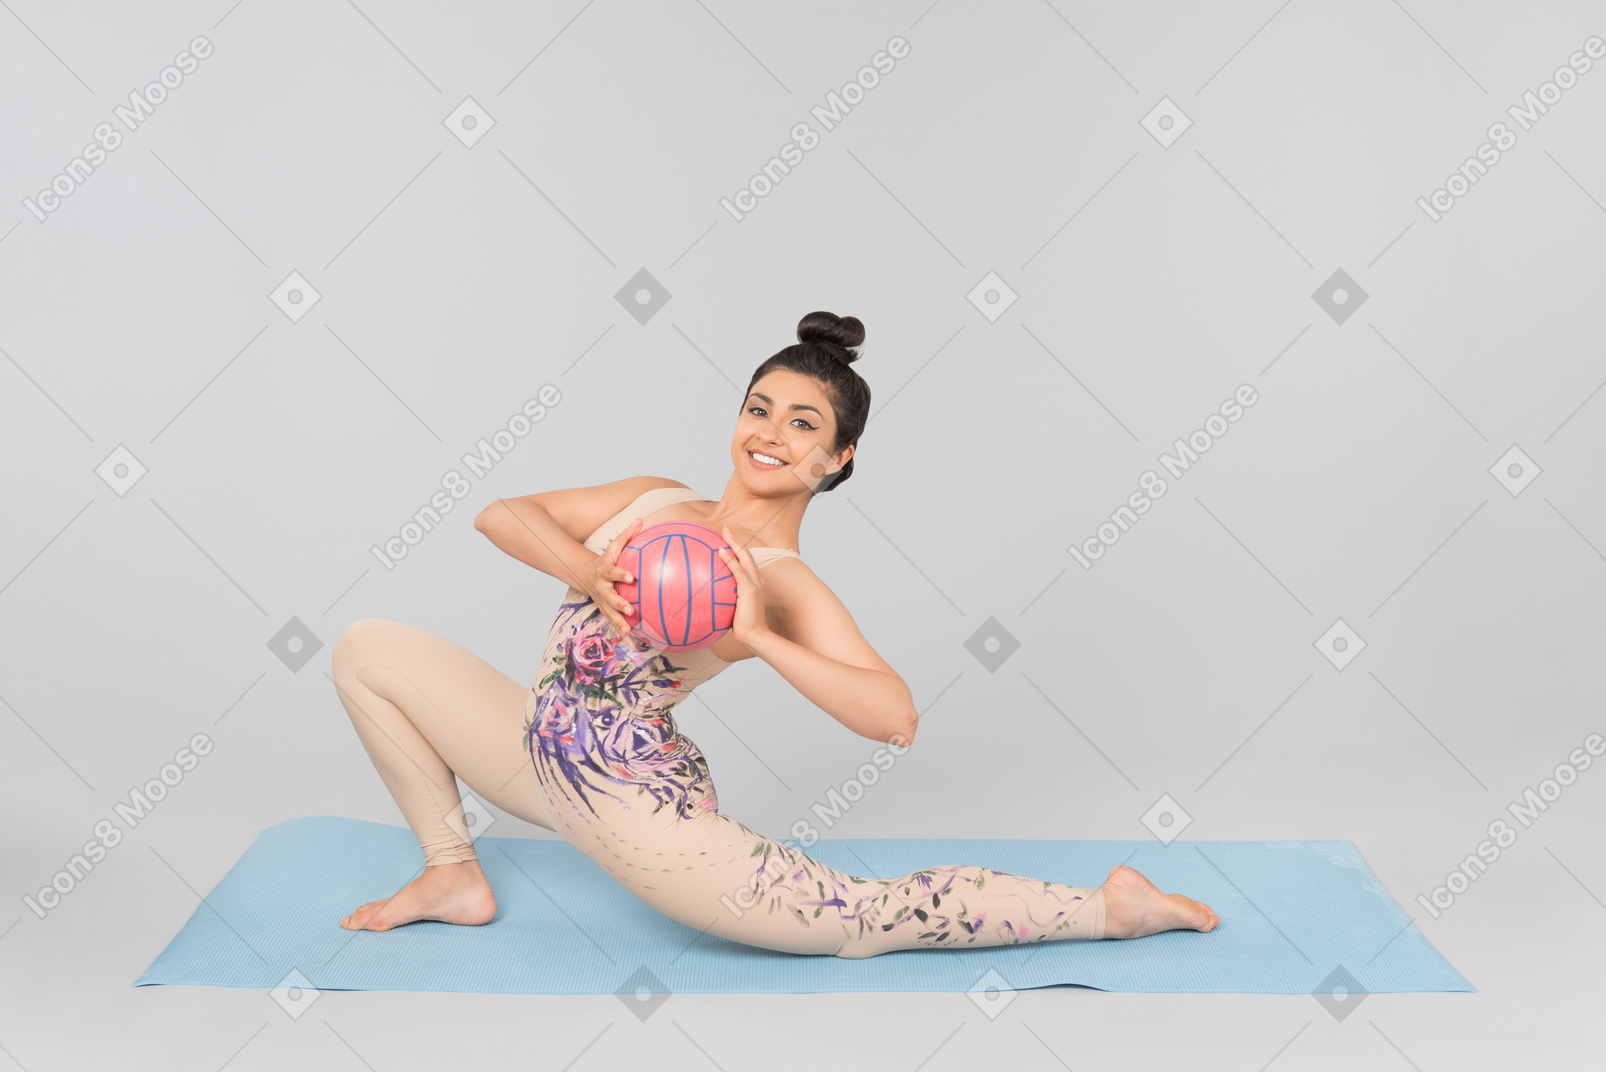 Young indian gymnast stretching herself sitting on yoga mat and holding ball